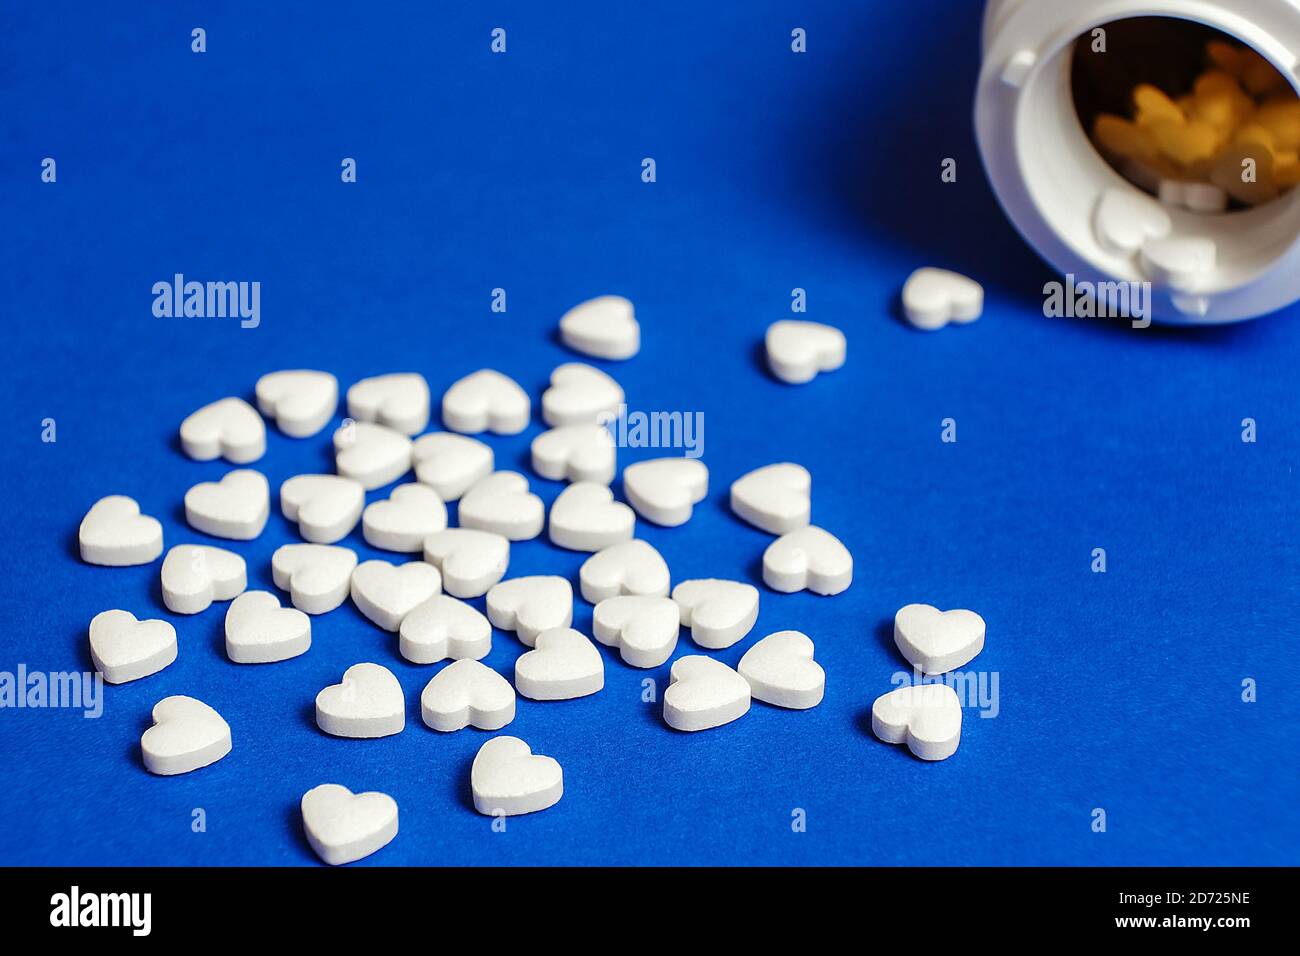 Pills in the shape of a heart poured out from the bottle on the blue surface of the table at the pharmacy. Isolated background. Blue background Stock Photo